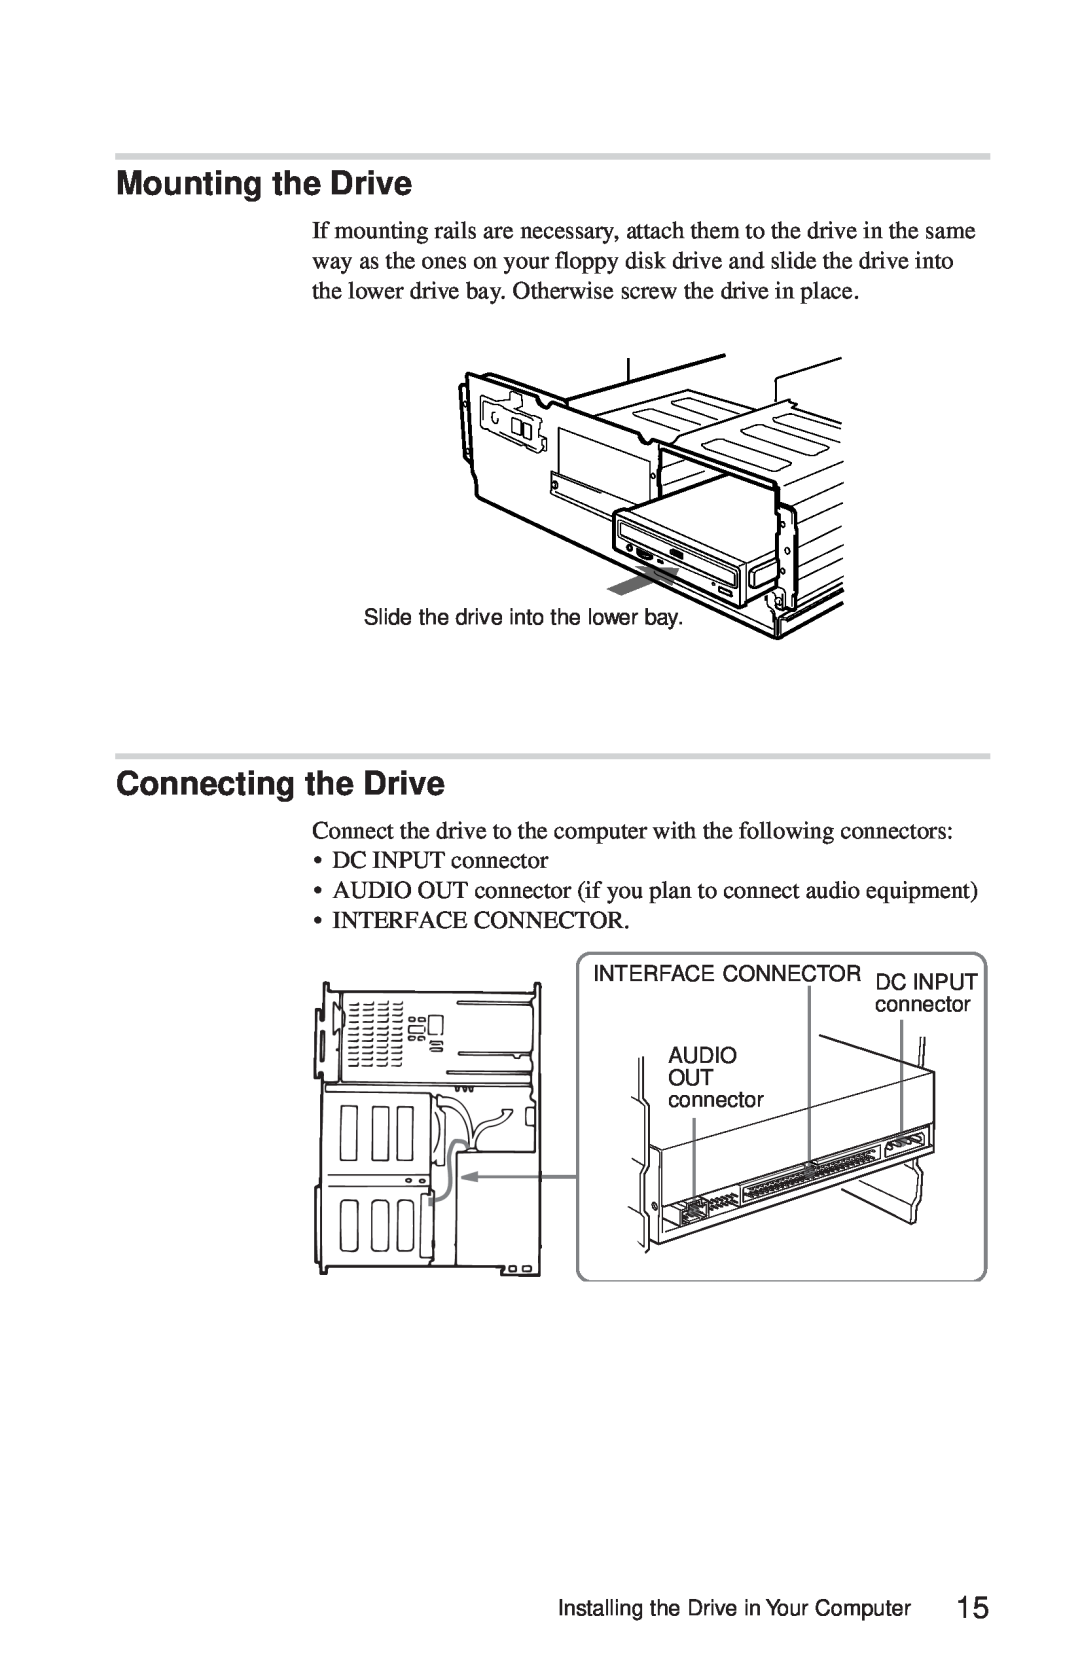 Sony CDU625 manual Mounting the Drive, Connecting the Drive 